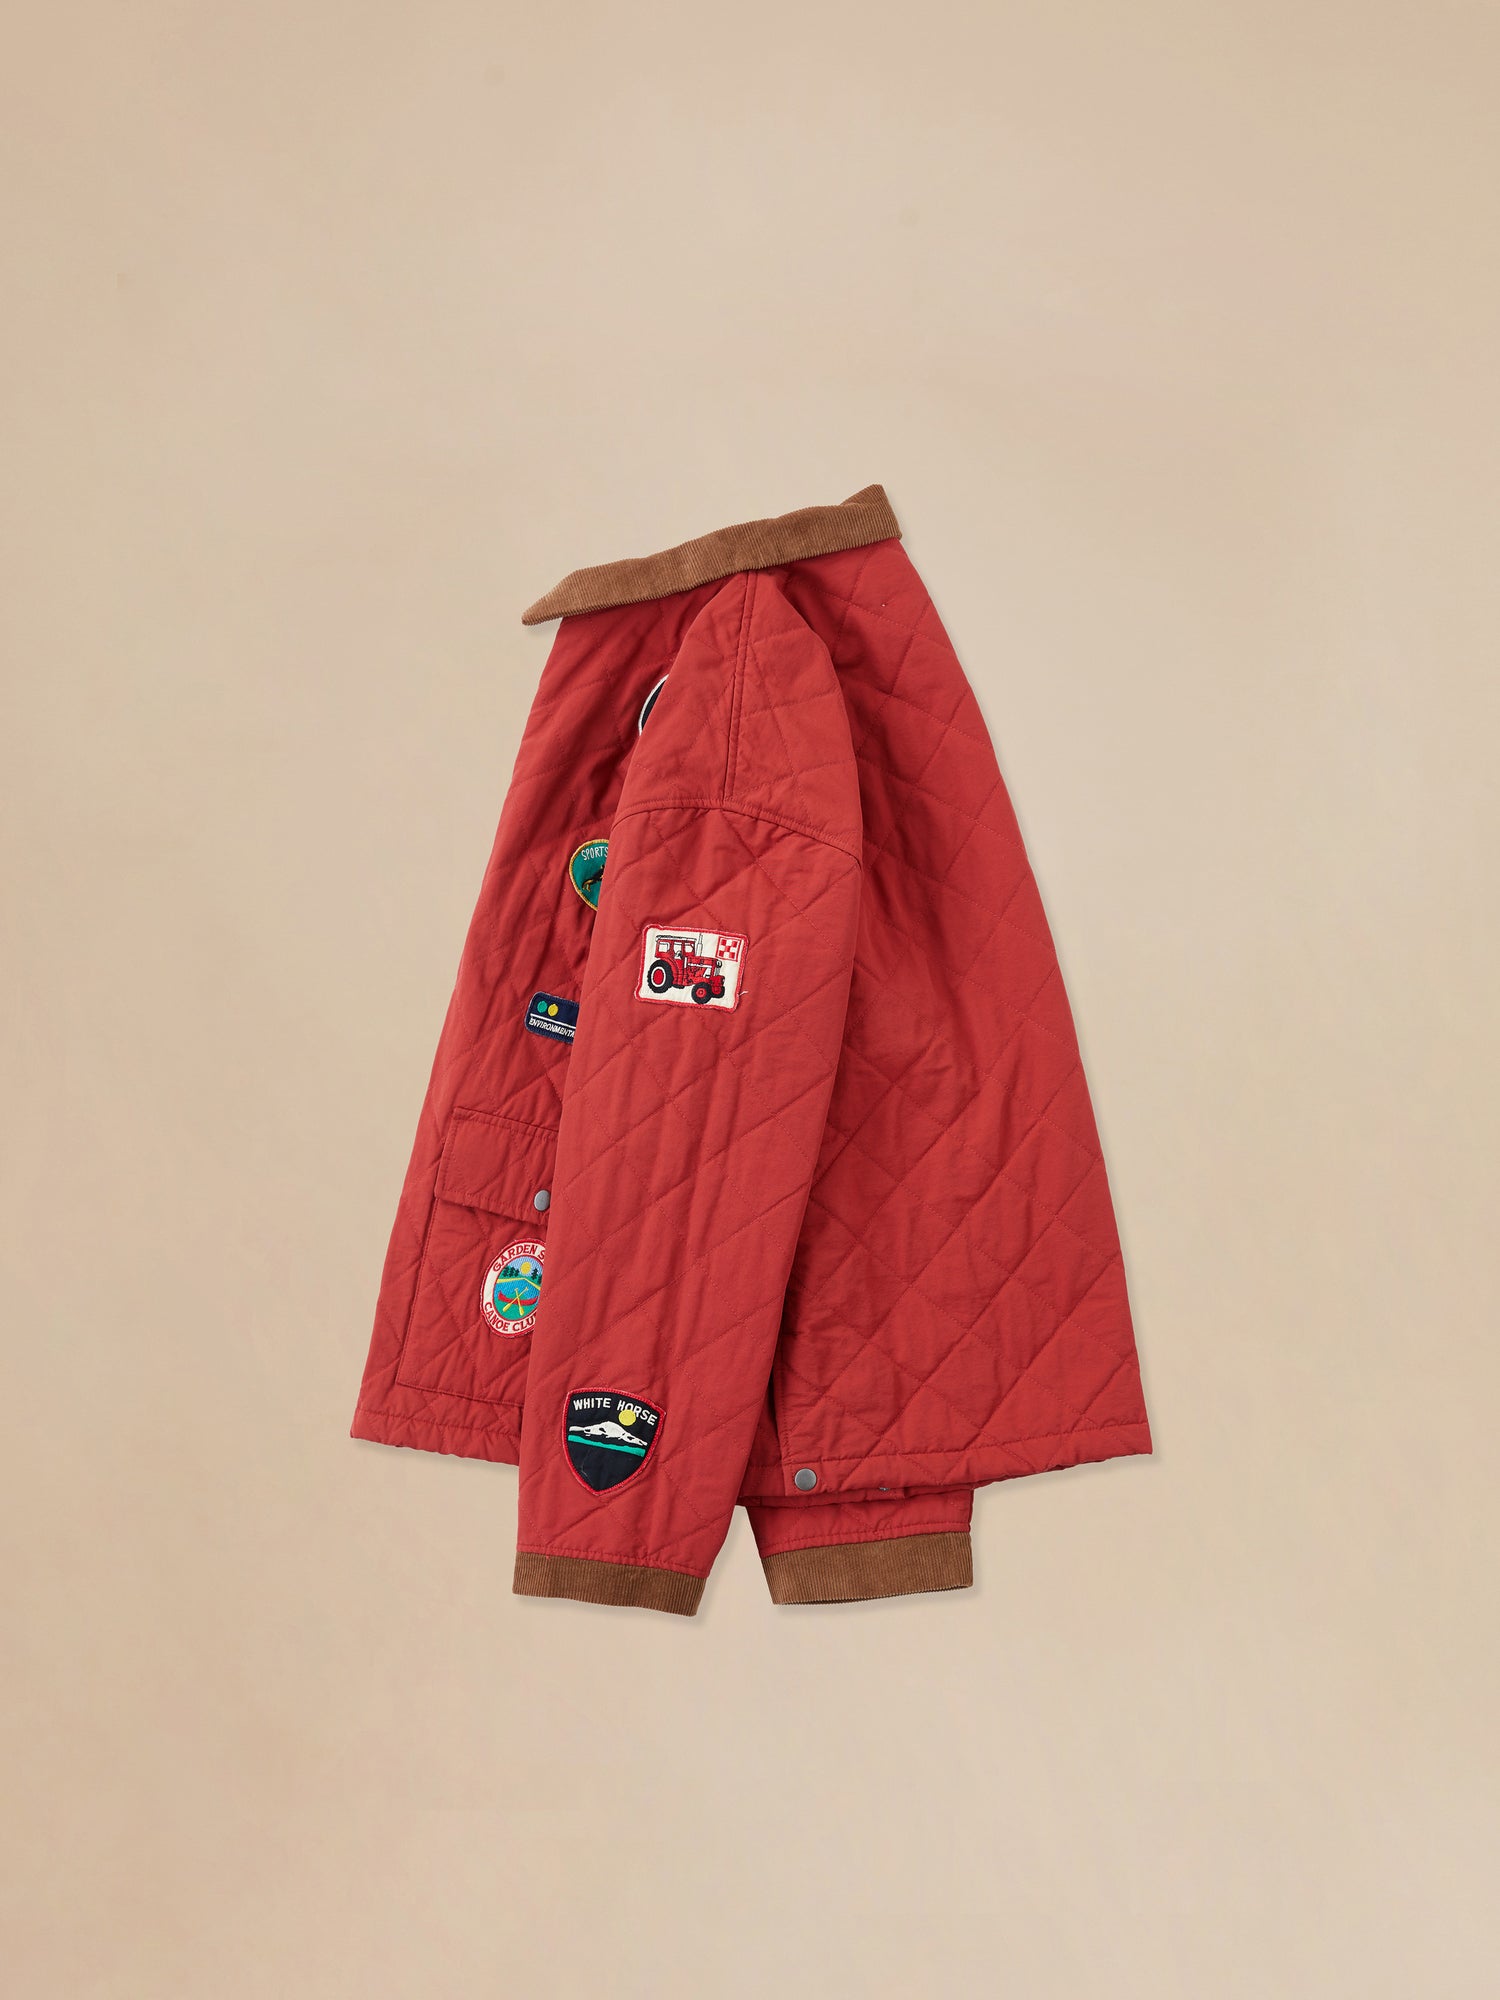 A Farmstead Quilt Patch Jacket by Found, a red quilted jacket with patches on it.